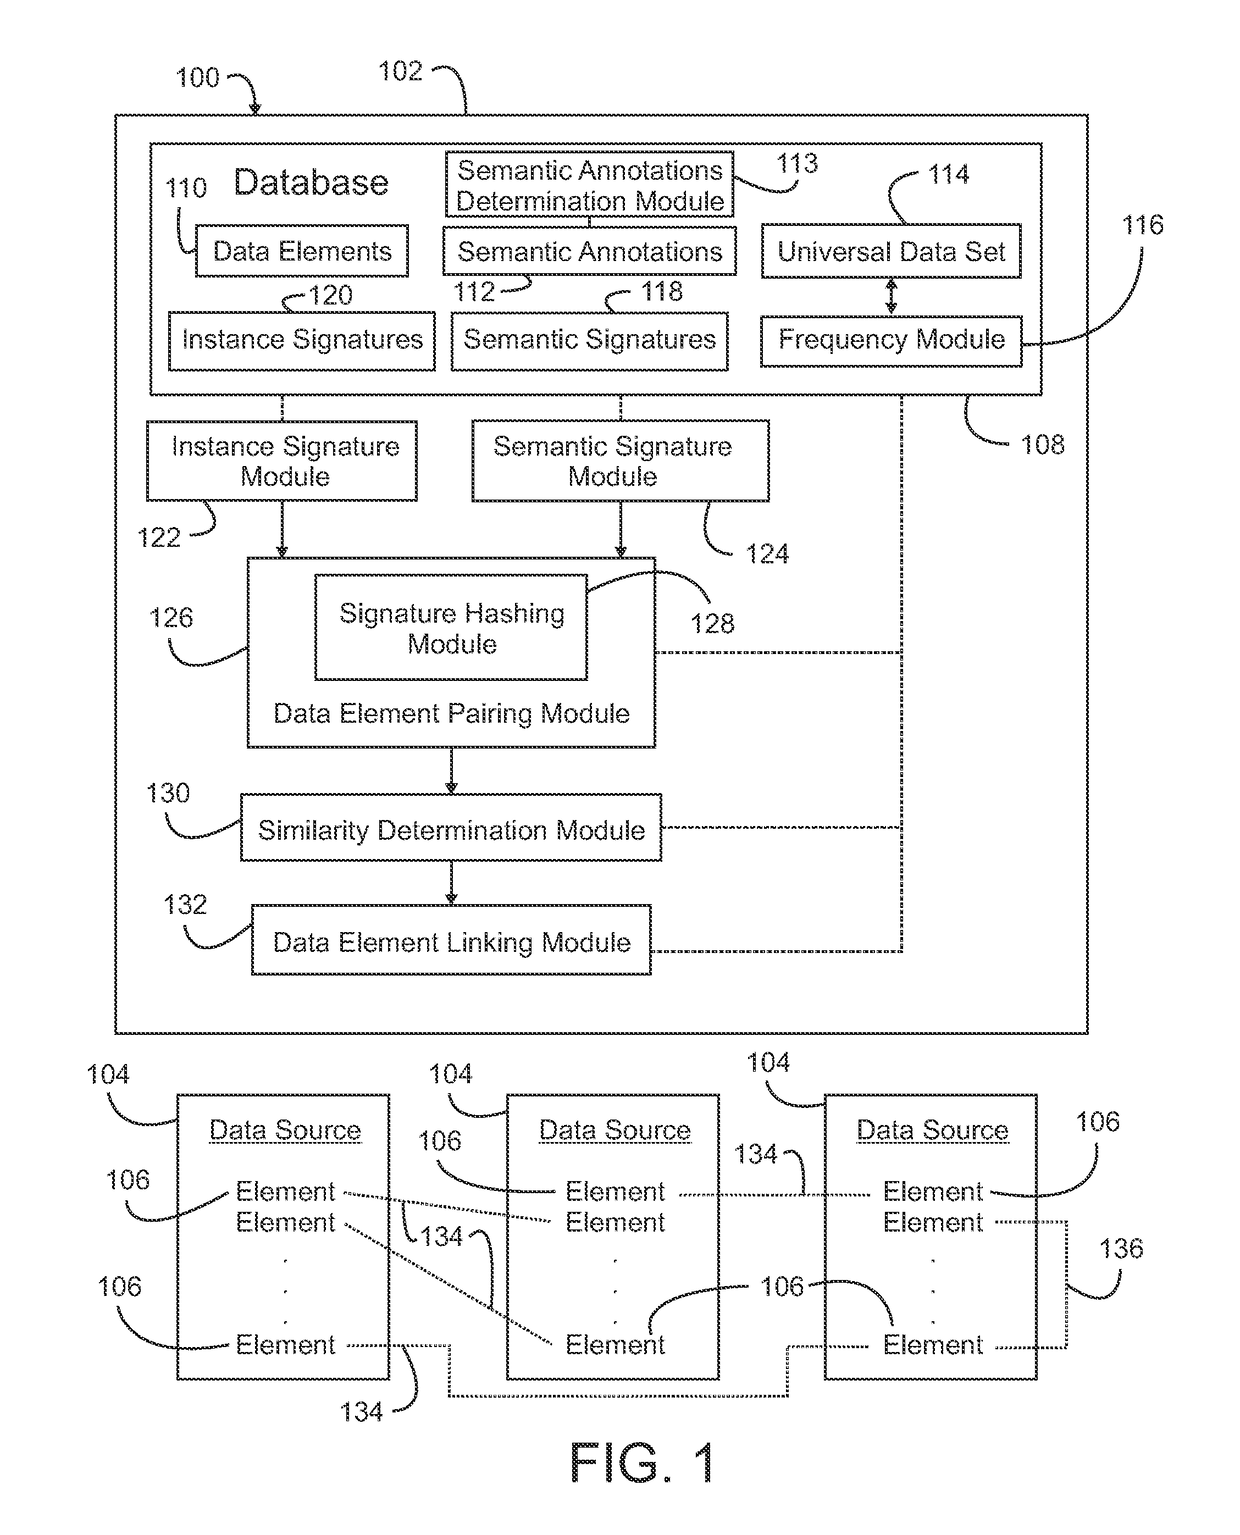 Linking data elements based on similarity data values and semantic annotations